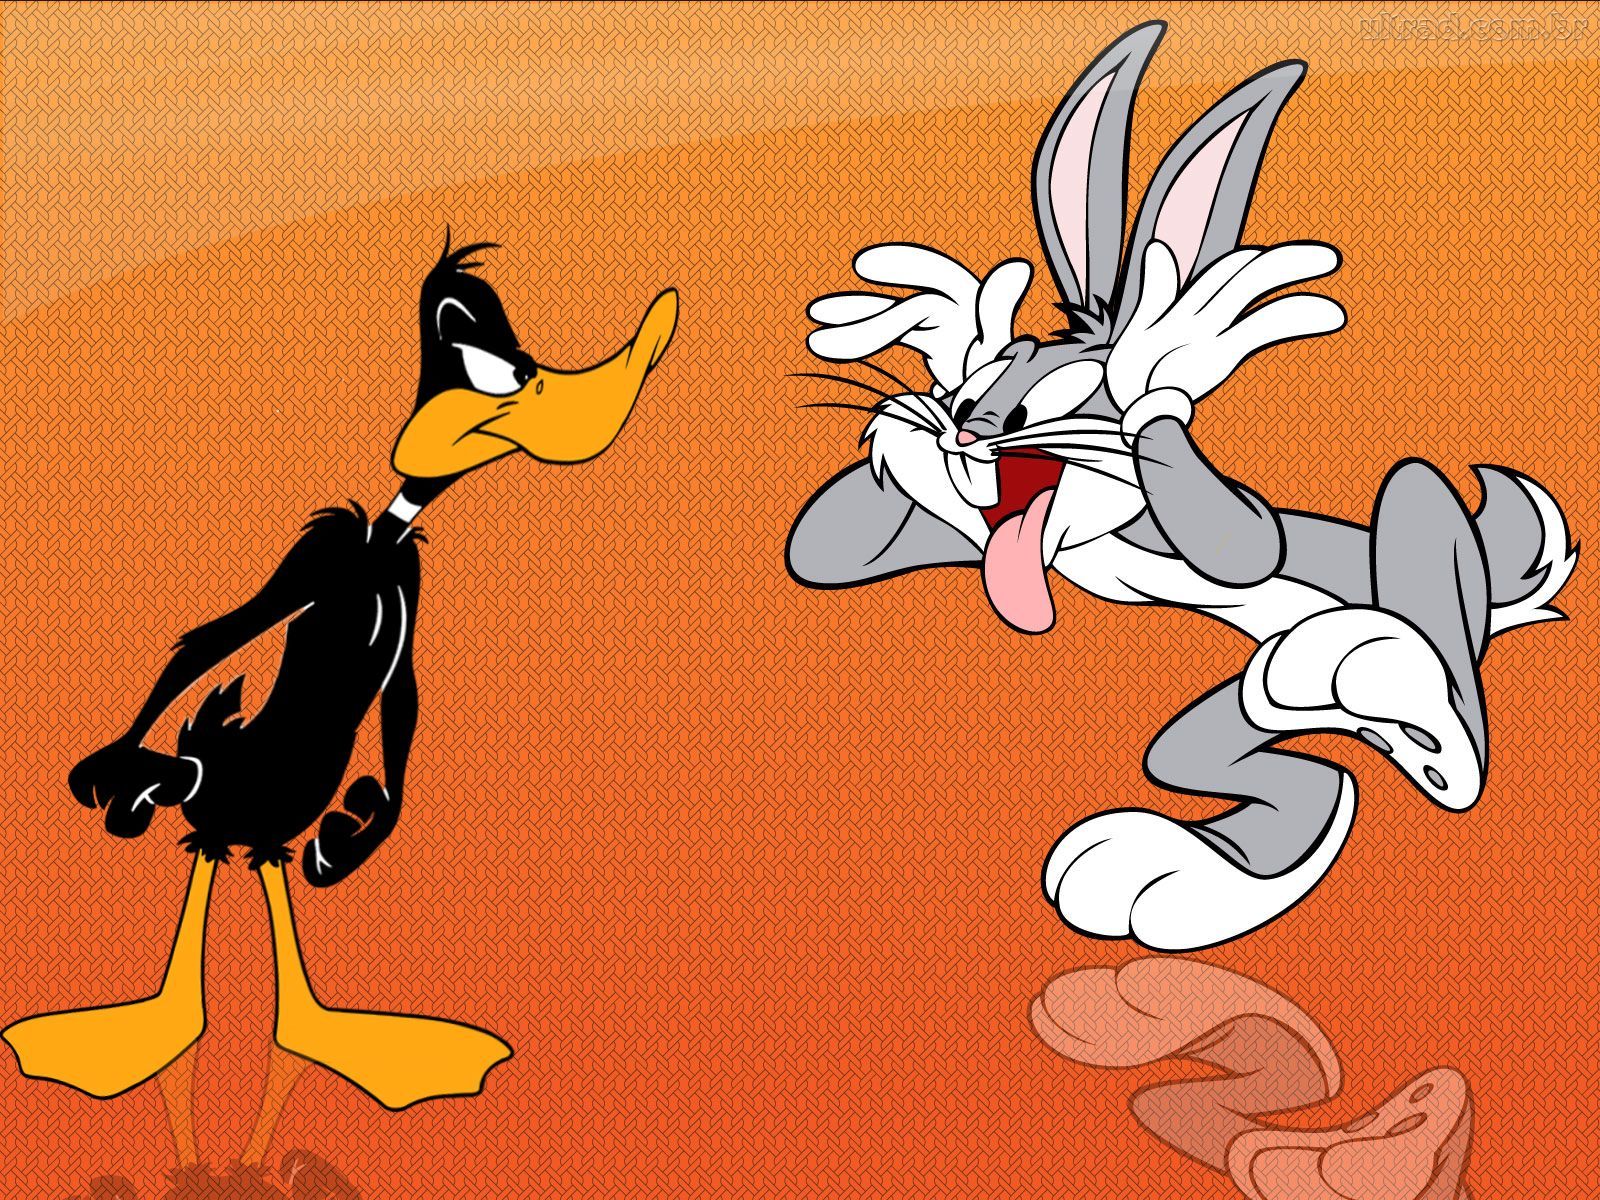 Bugs Bunny Angry Face - wallpaper.